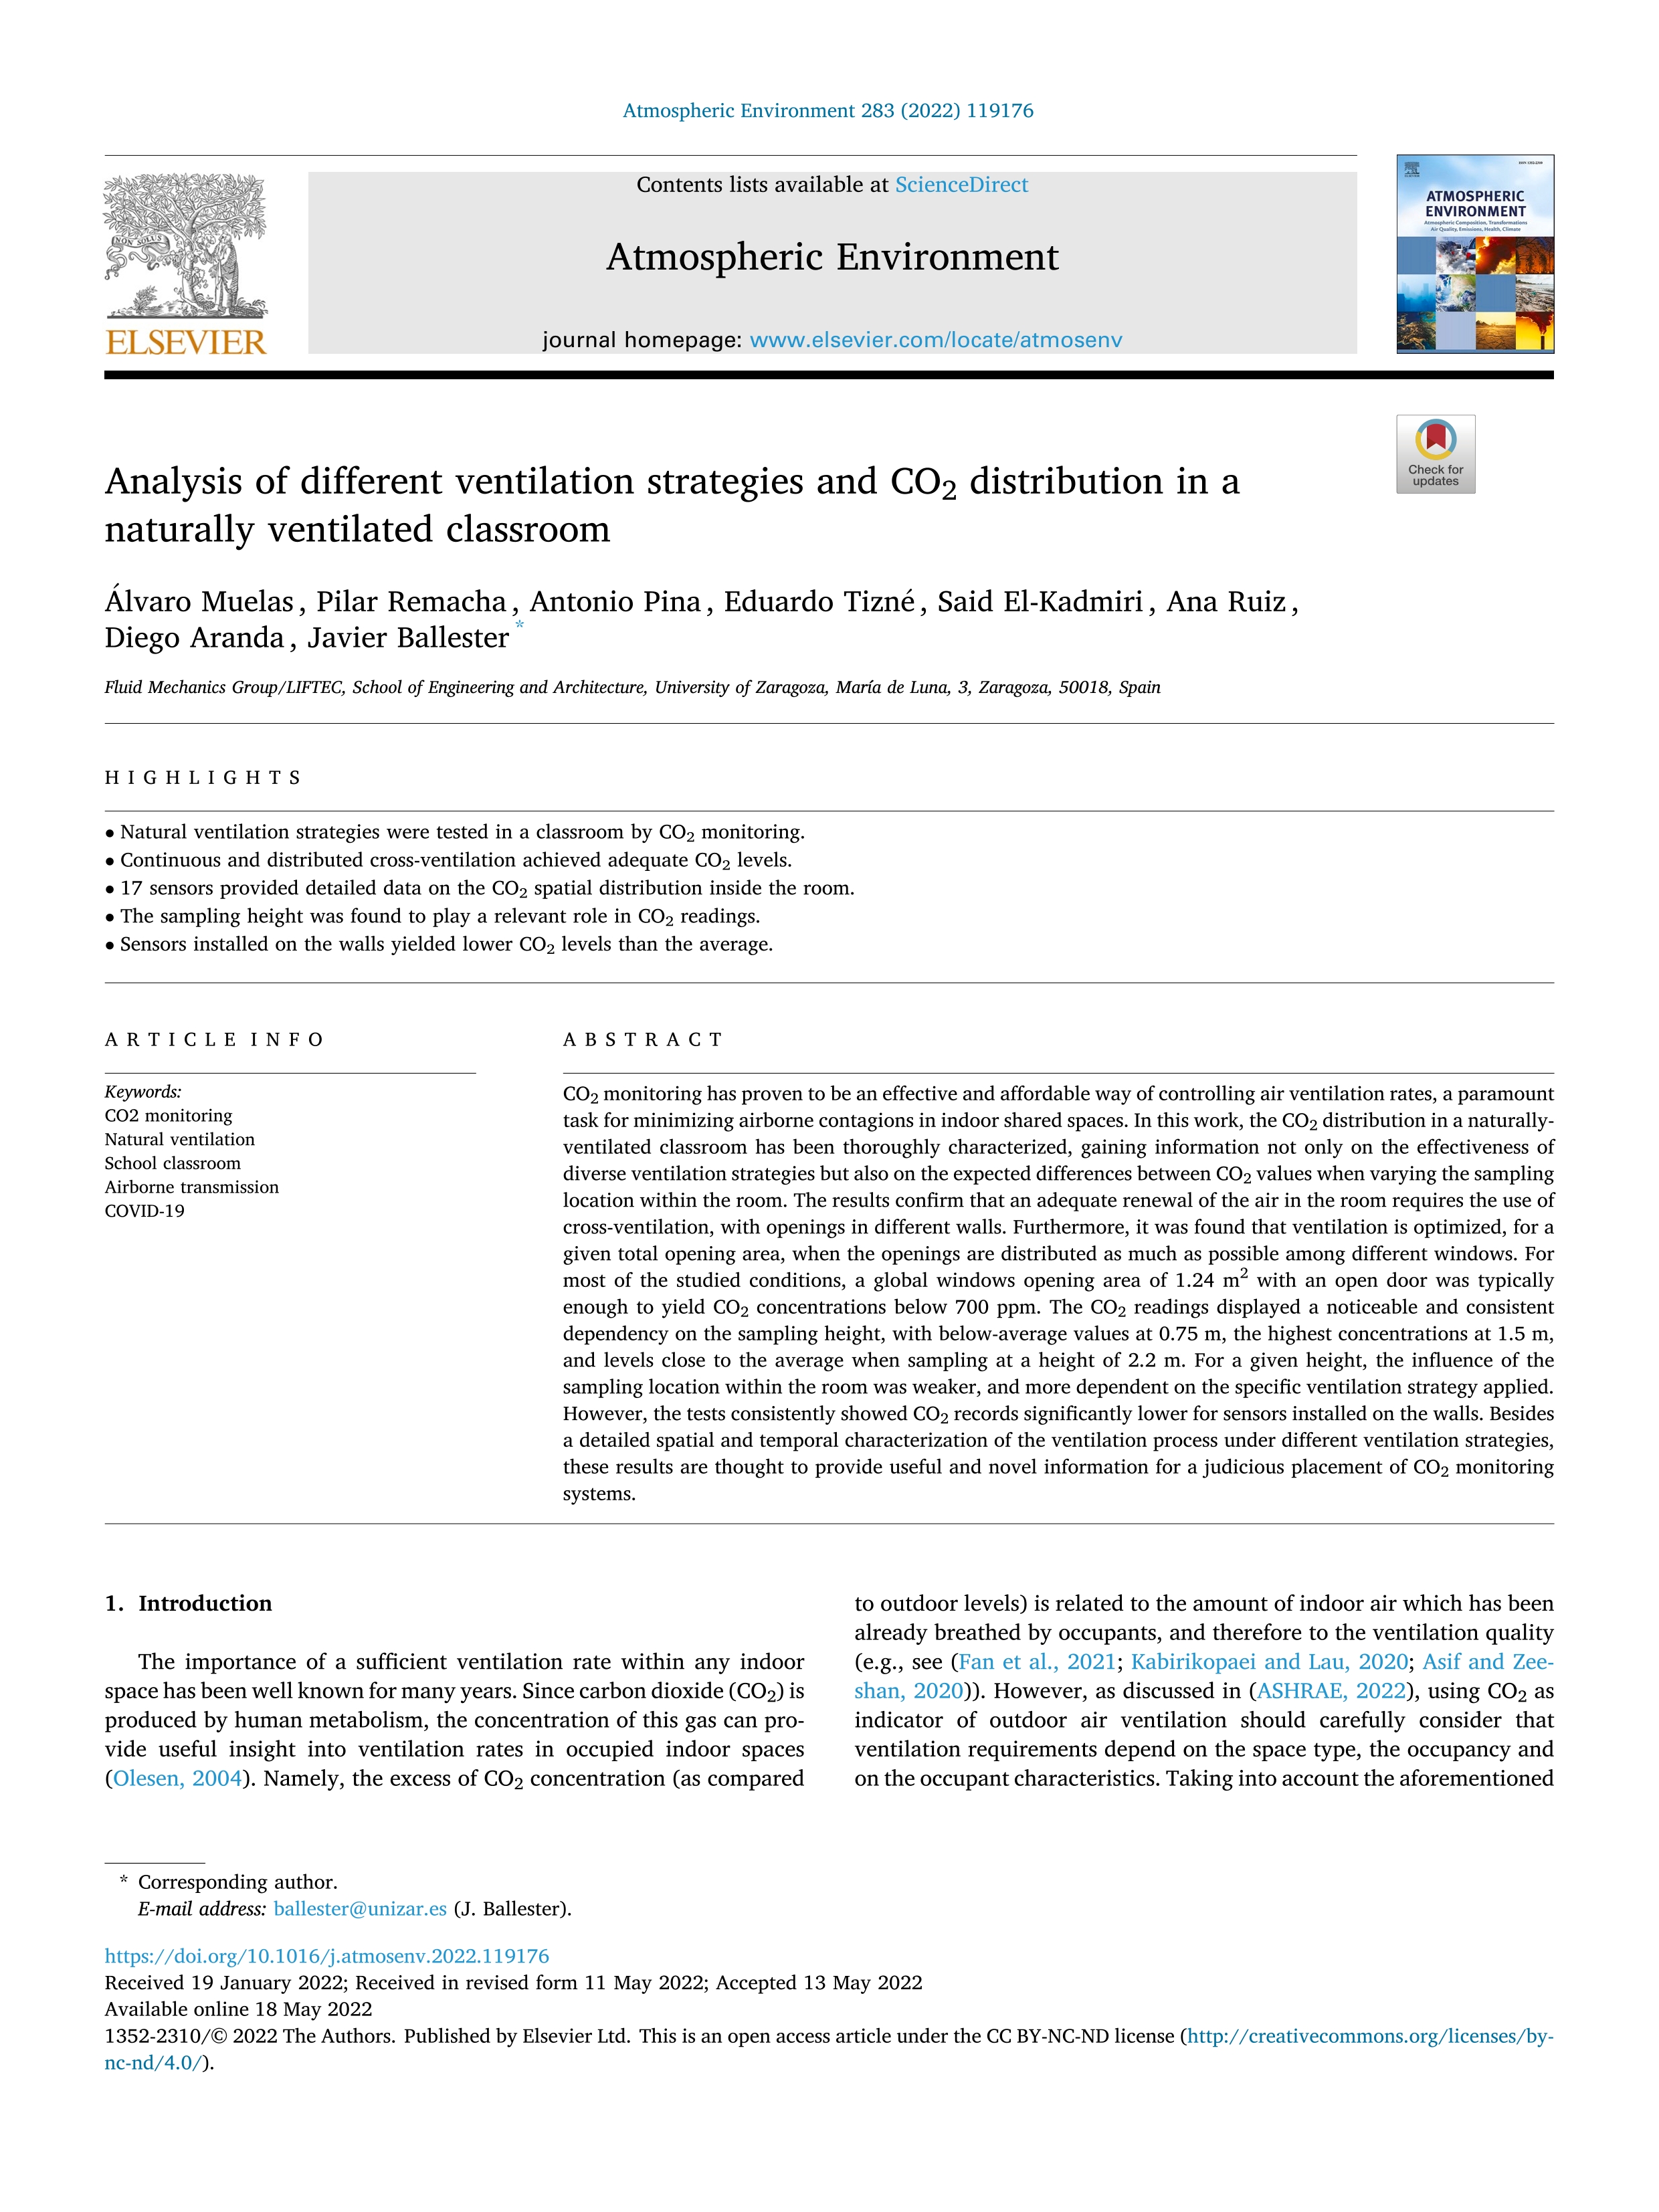 Analysis of different ventilation strategies and CO2 distribution in a naturally ventilated classroom